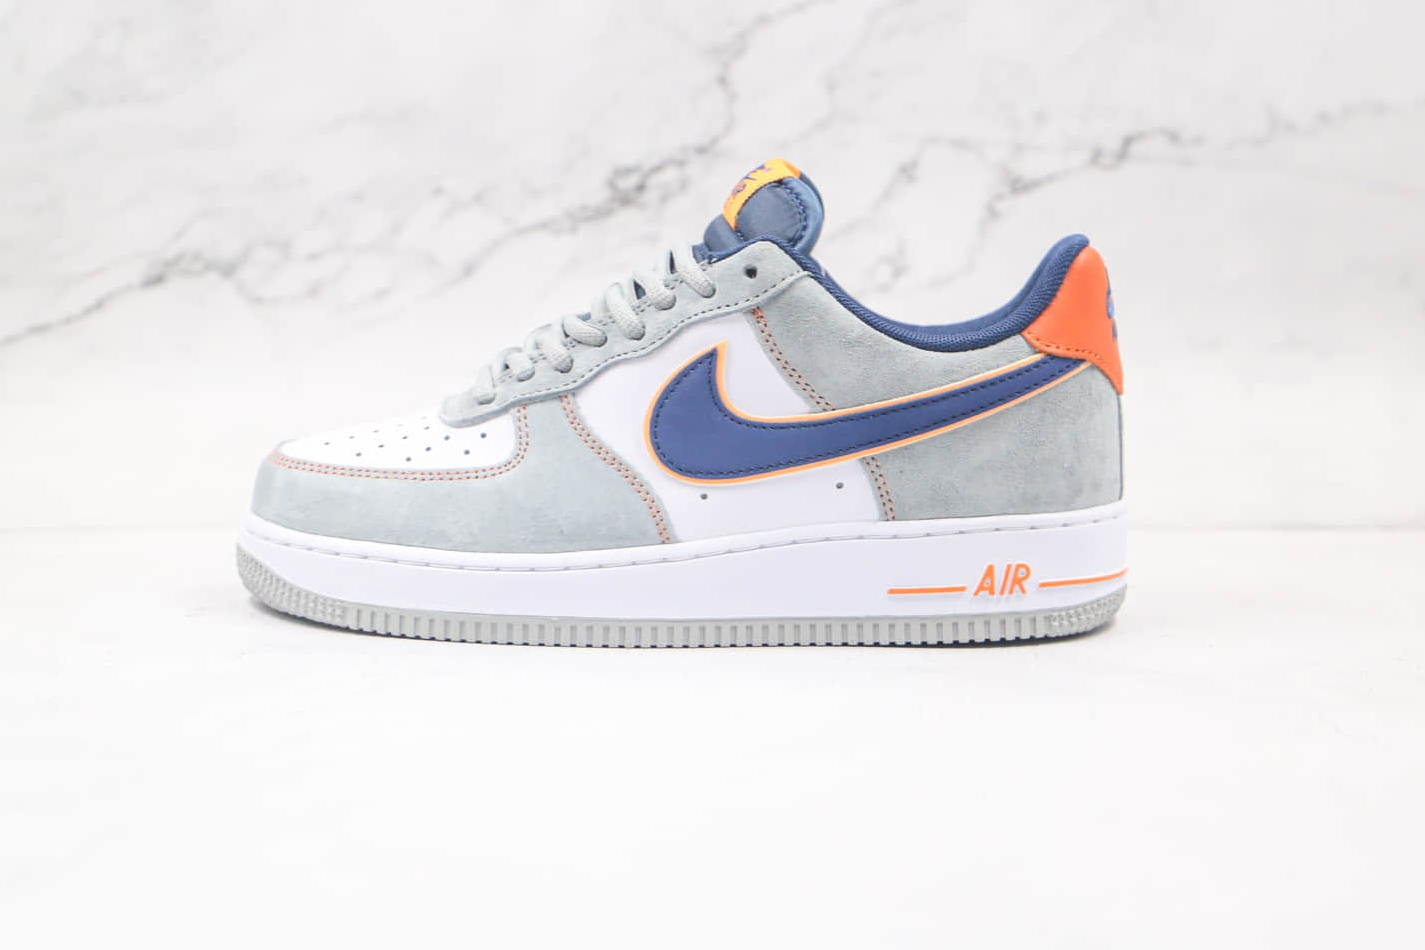 Nike Air Force 1 07 Low White Cool Grey Navy Blue Orange CQ5059-103 - Stylish and Vibrant Sneaker Choice